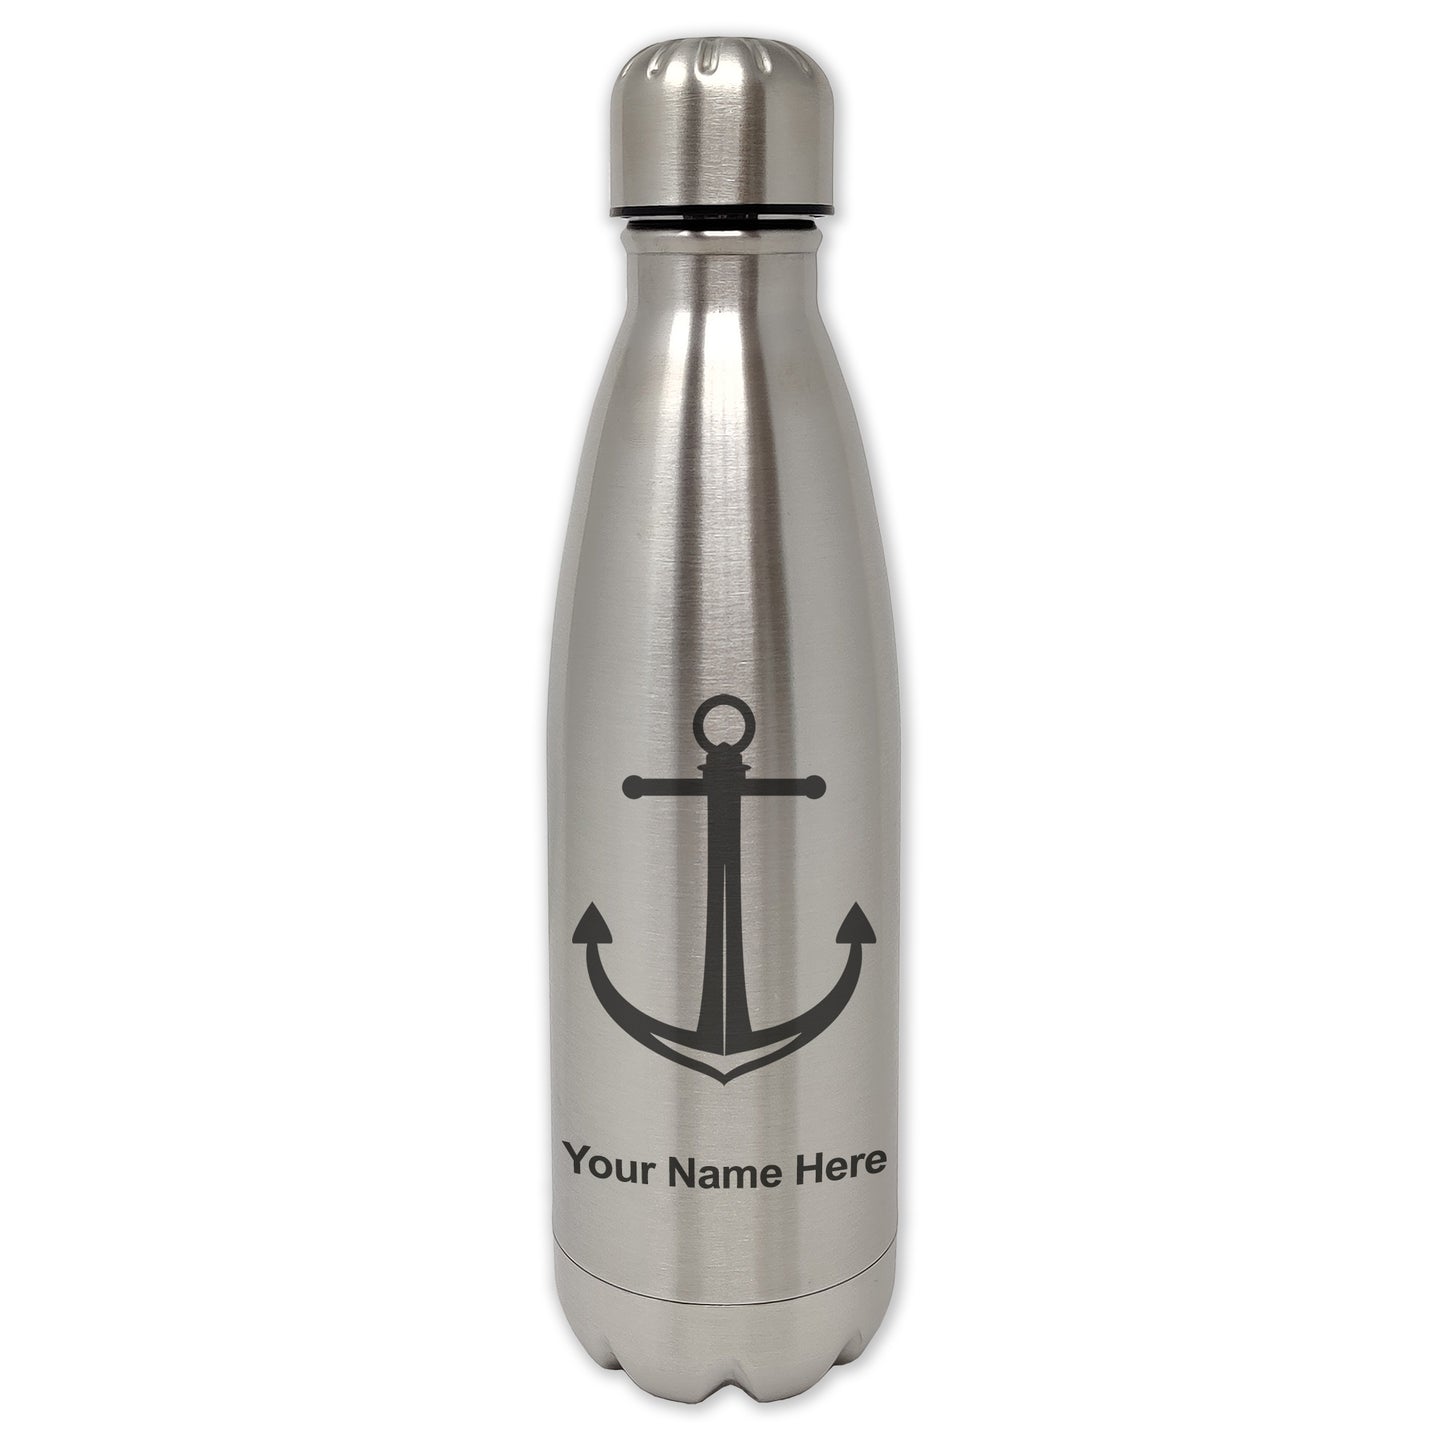 LaserGram Single Wall Water Bottle, Boat Anchor, Personalized Engraving Included